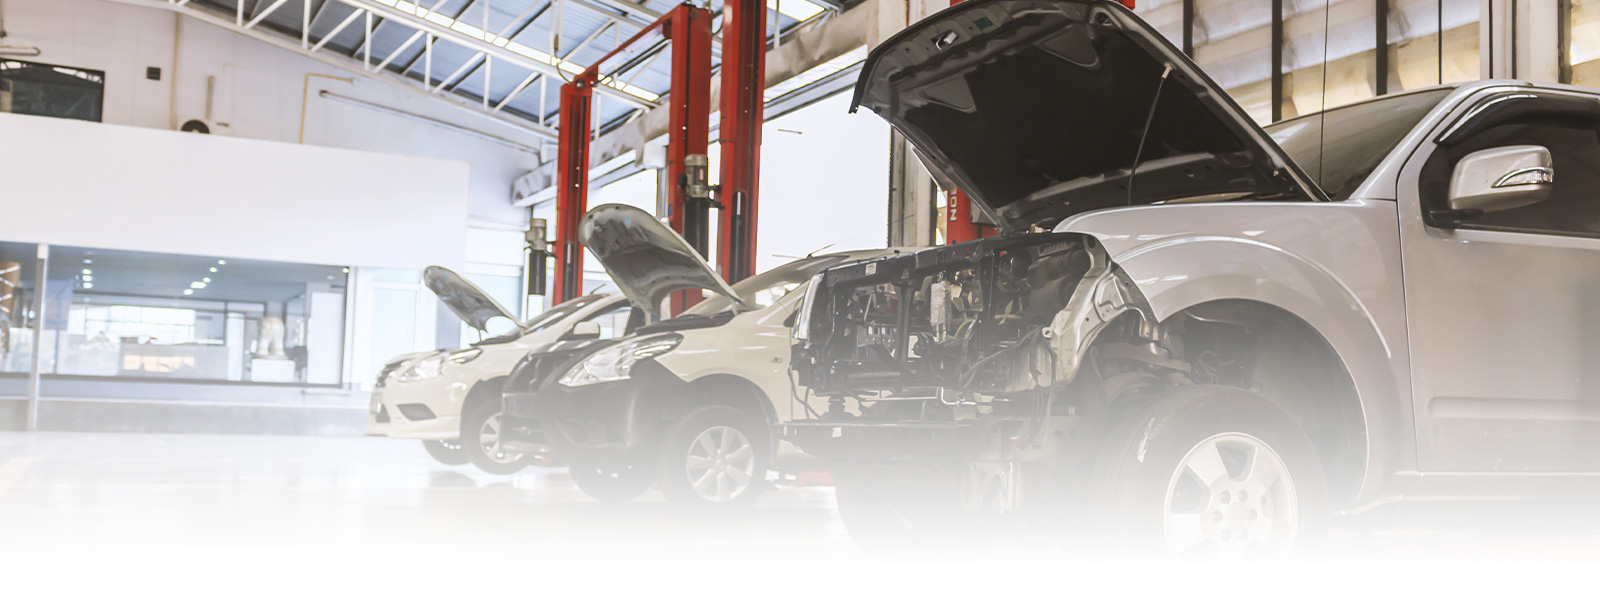 C & C Collision Repair offers a wide range of auto body services to vehicles in Thibodaux, LA and surrounding areas.